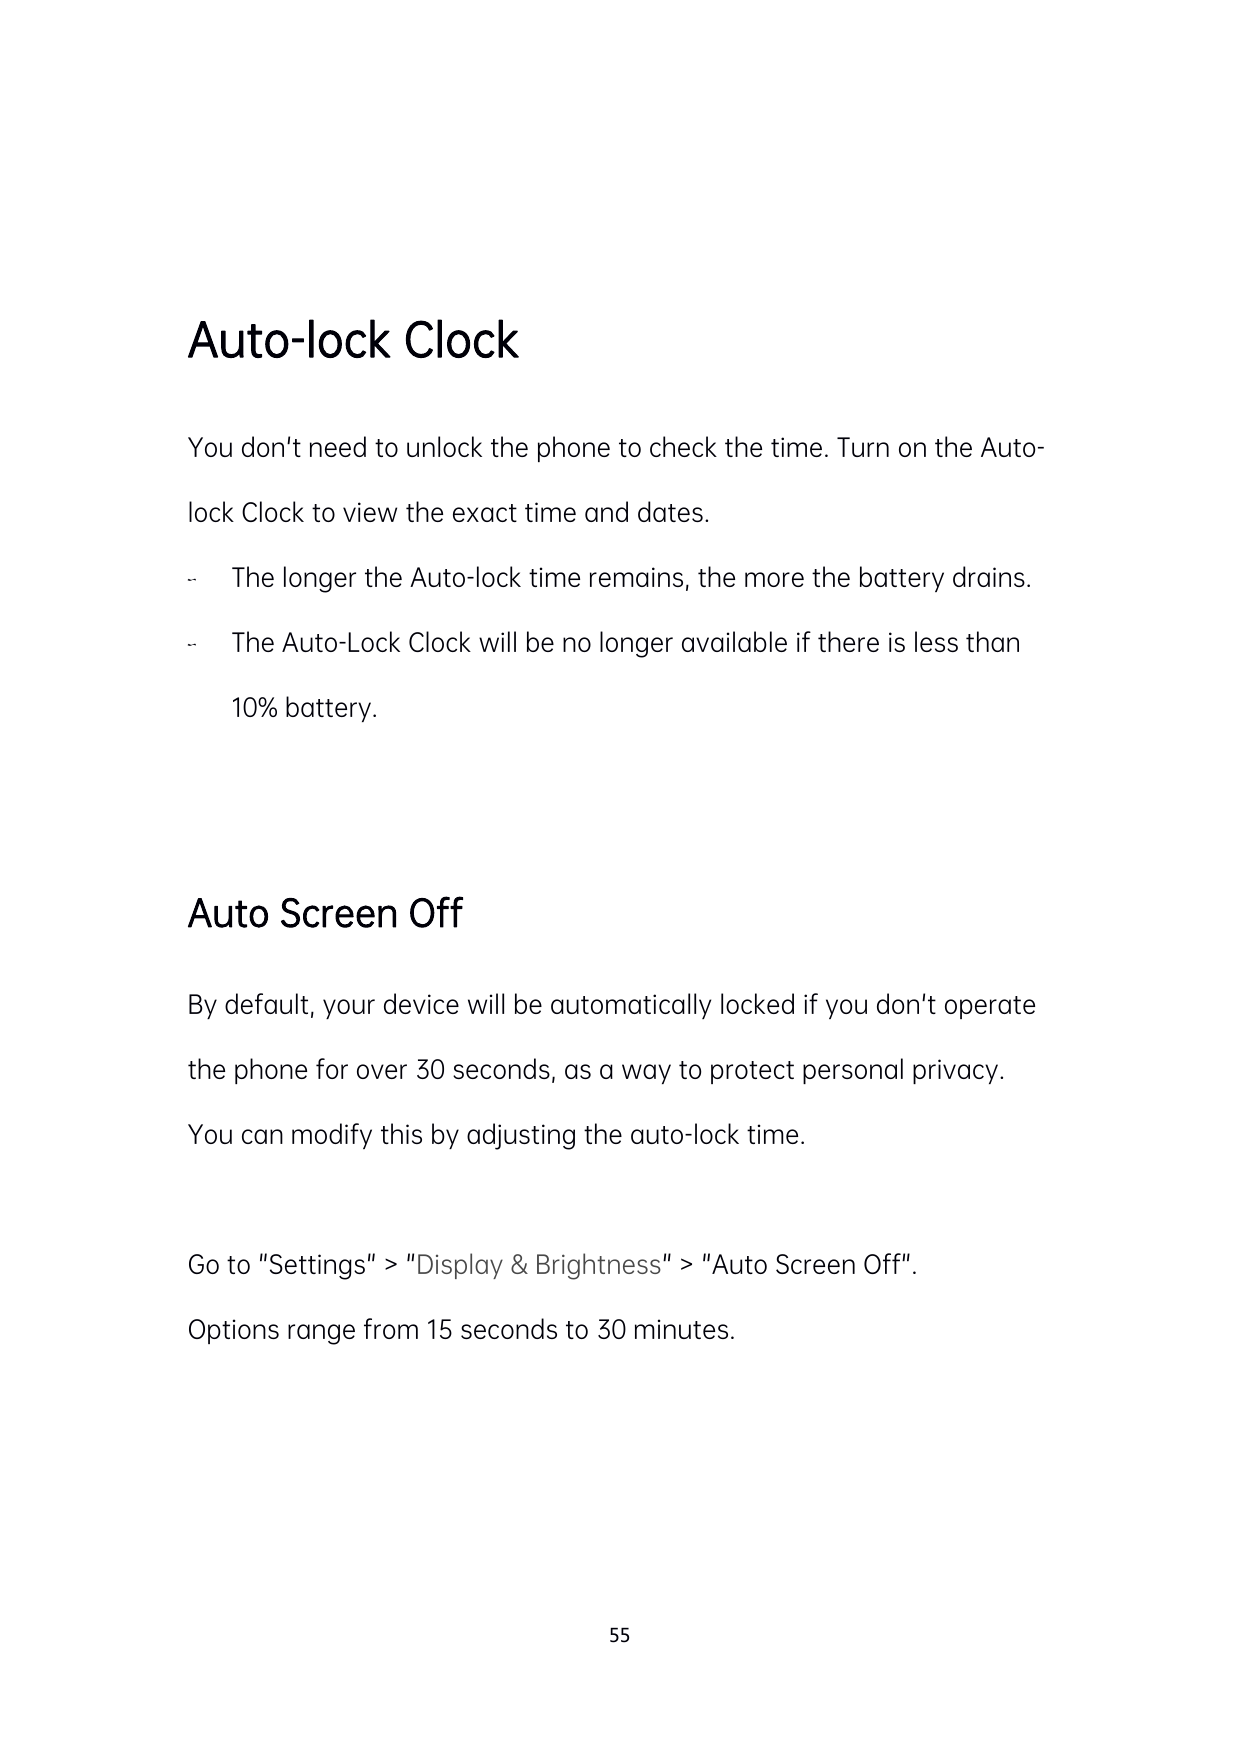 Auto-lock ClockYou don't need to unlock the phone to check the time. Turn on the Autolock Clock to view the exact time and dates